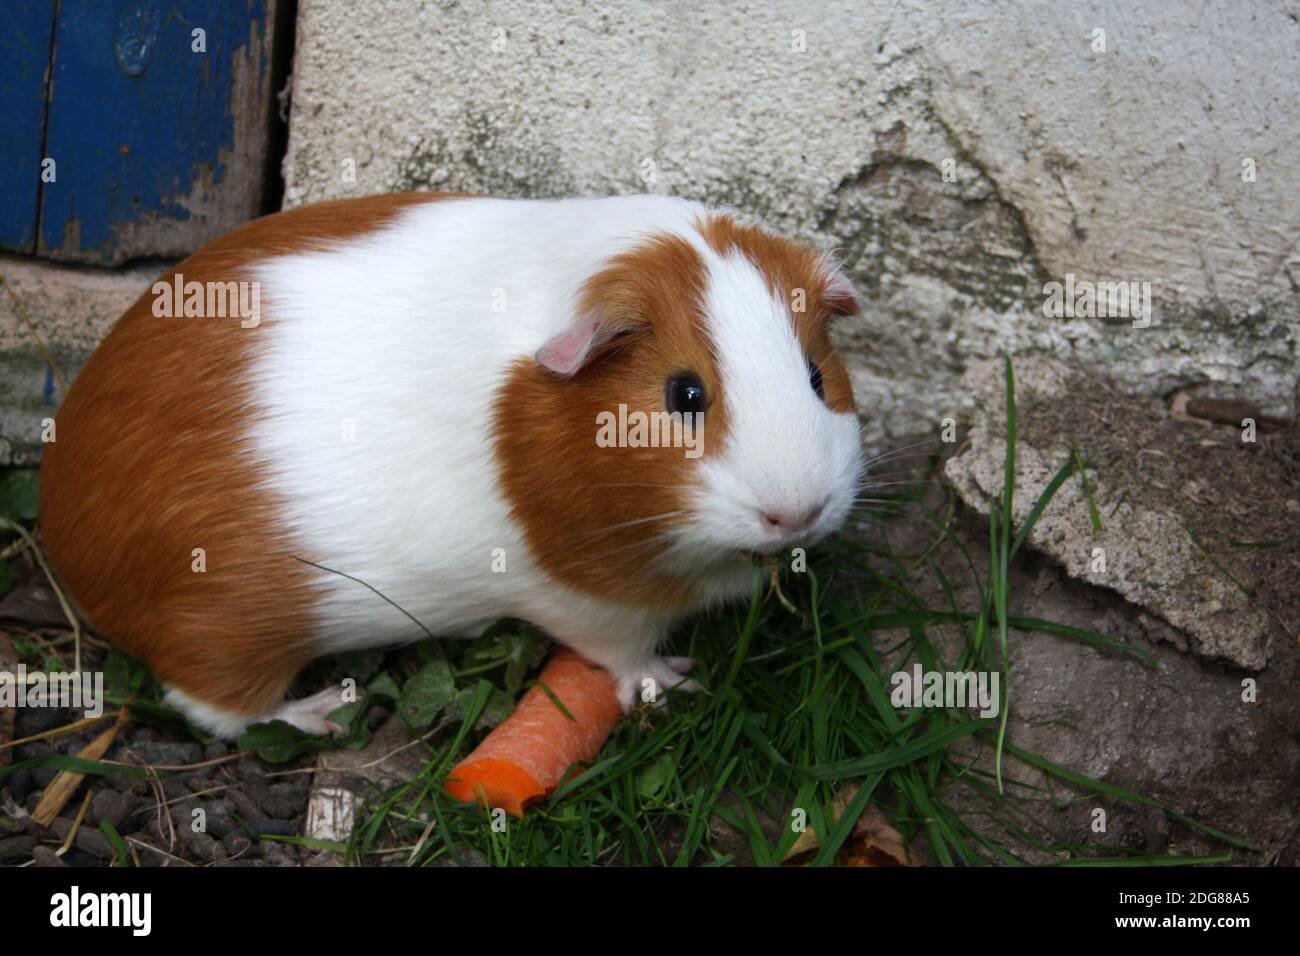 Guinea pig with carrot Stock Photo